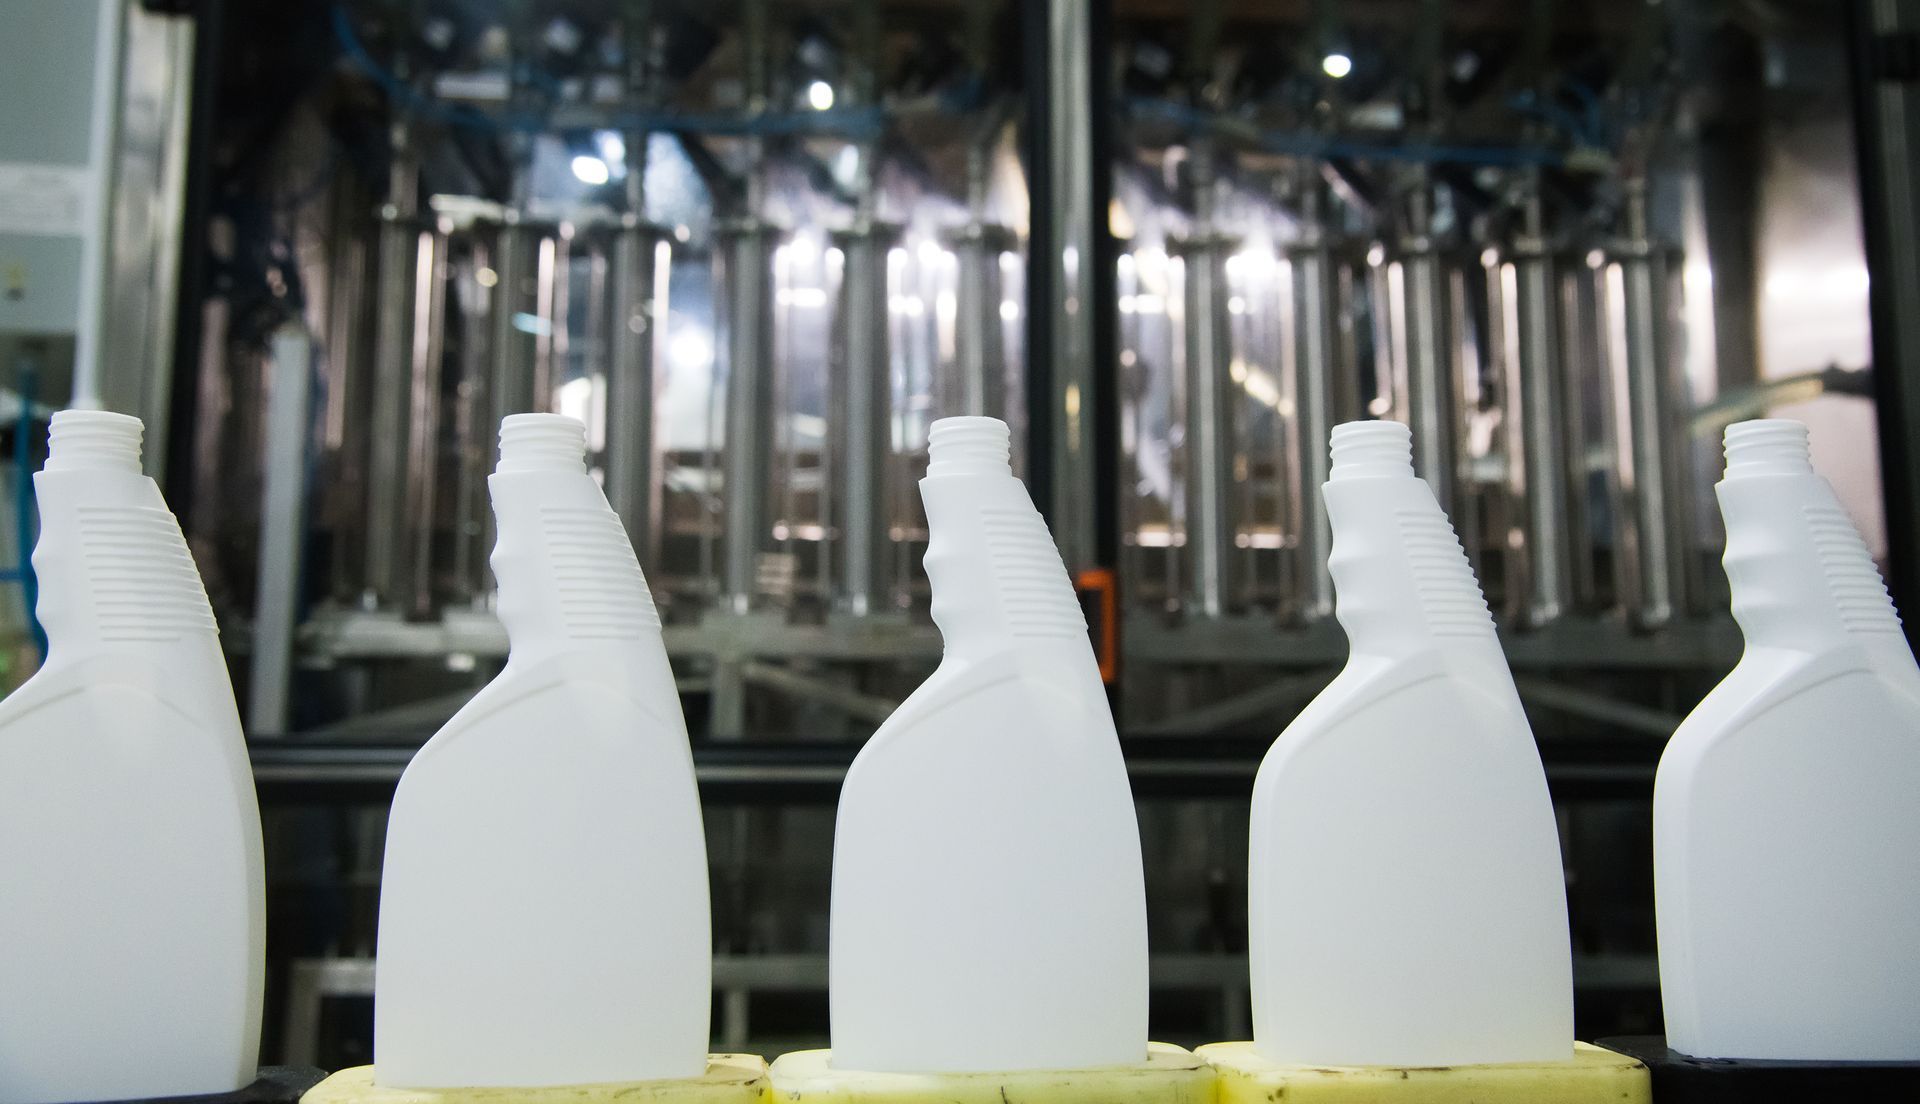 a row of white plastic bottles are lined up on a conveyor belt waiting to be filled with industrial solvents